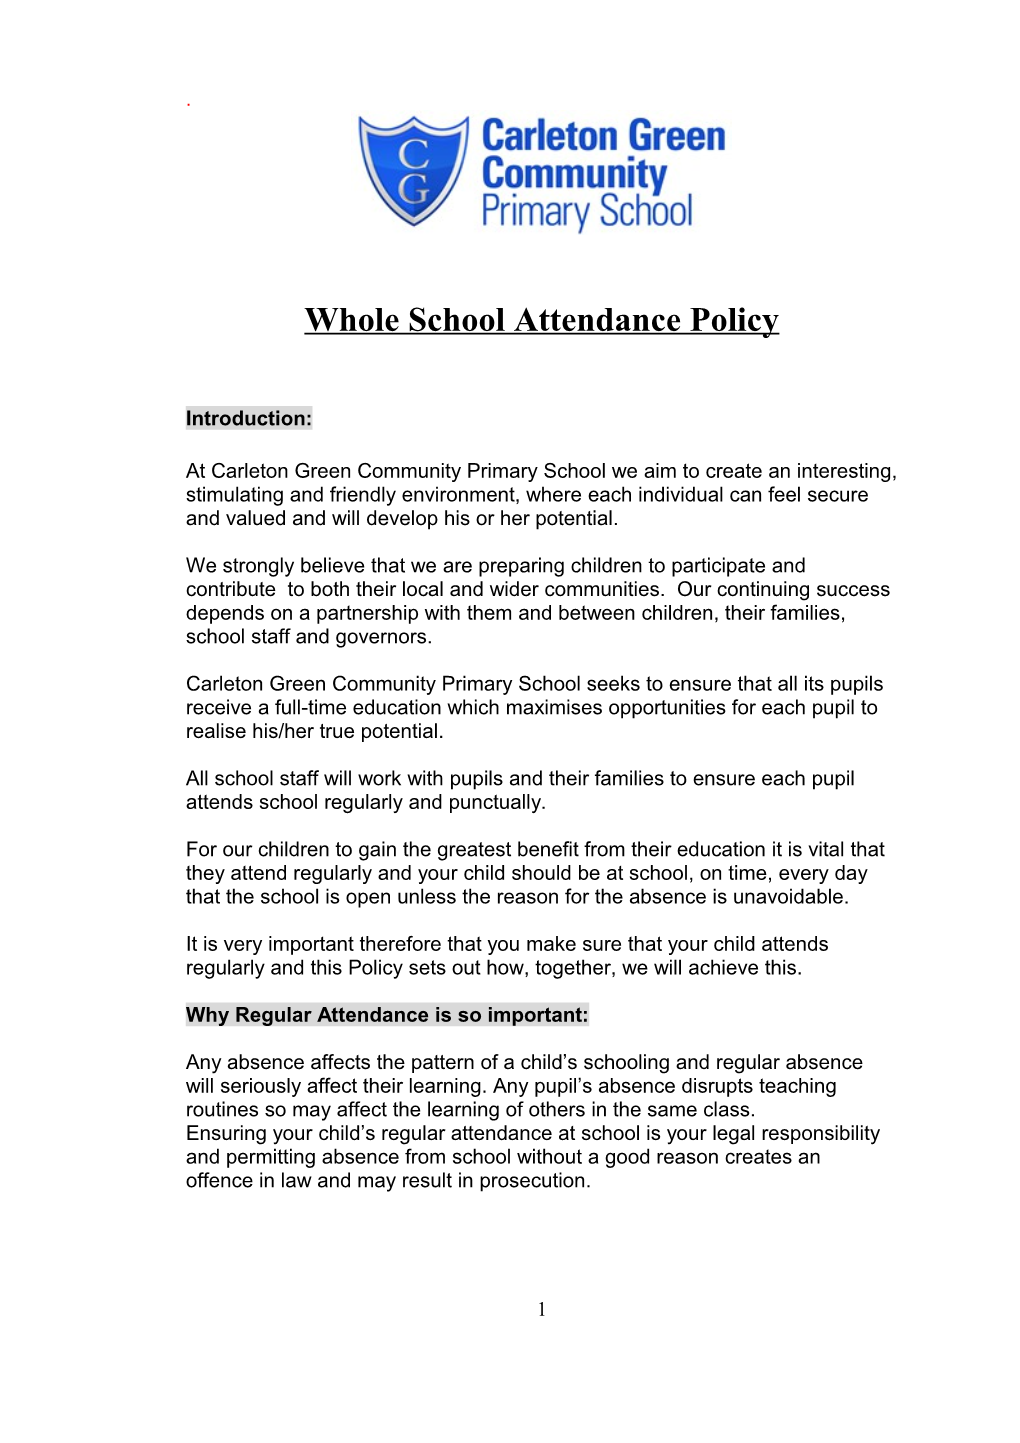 Whole School Attendance Policy